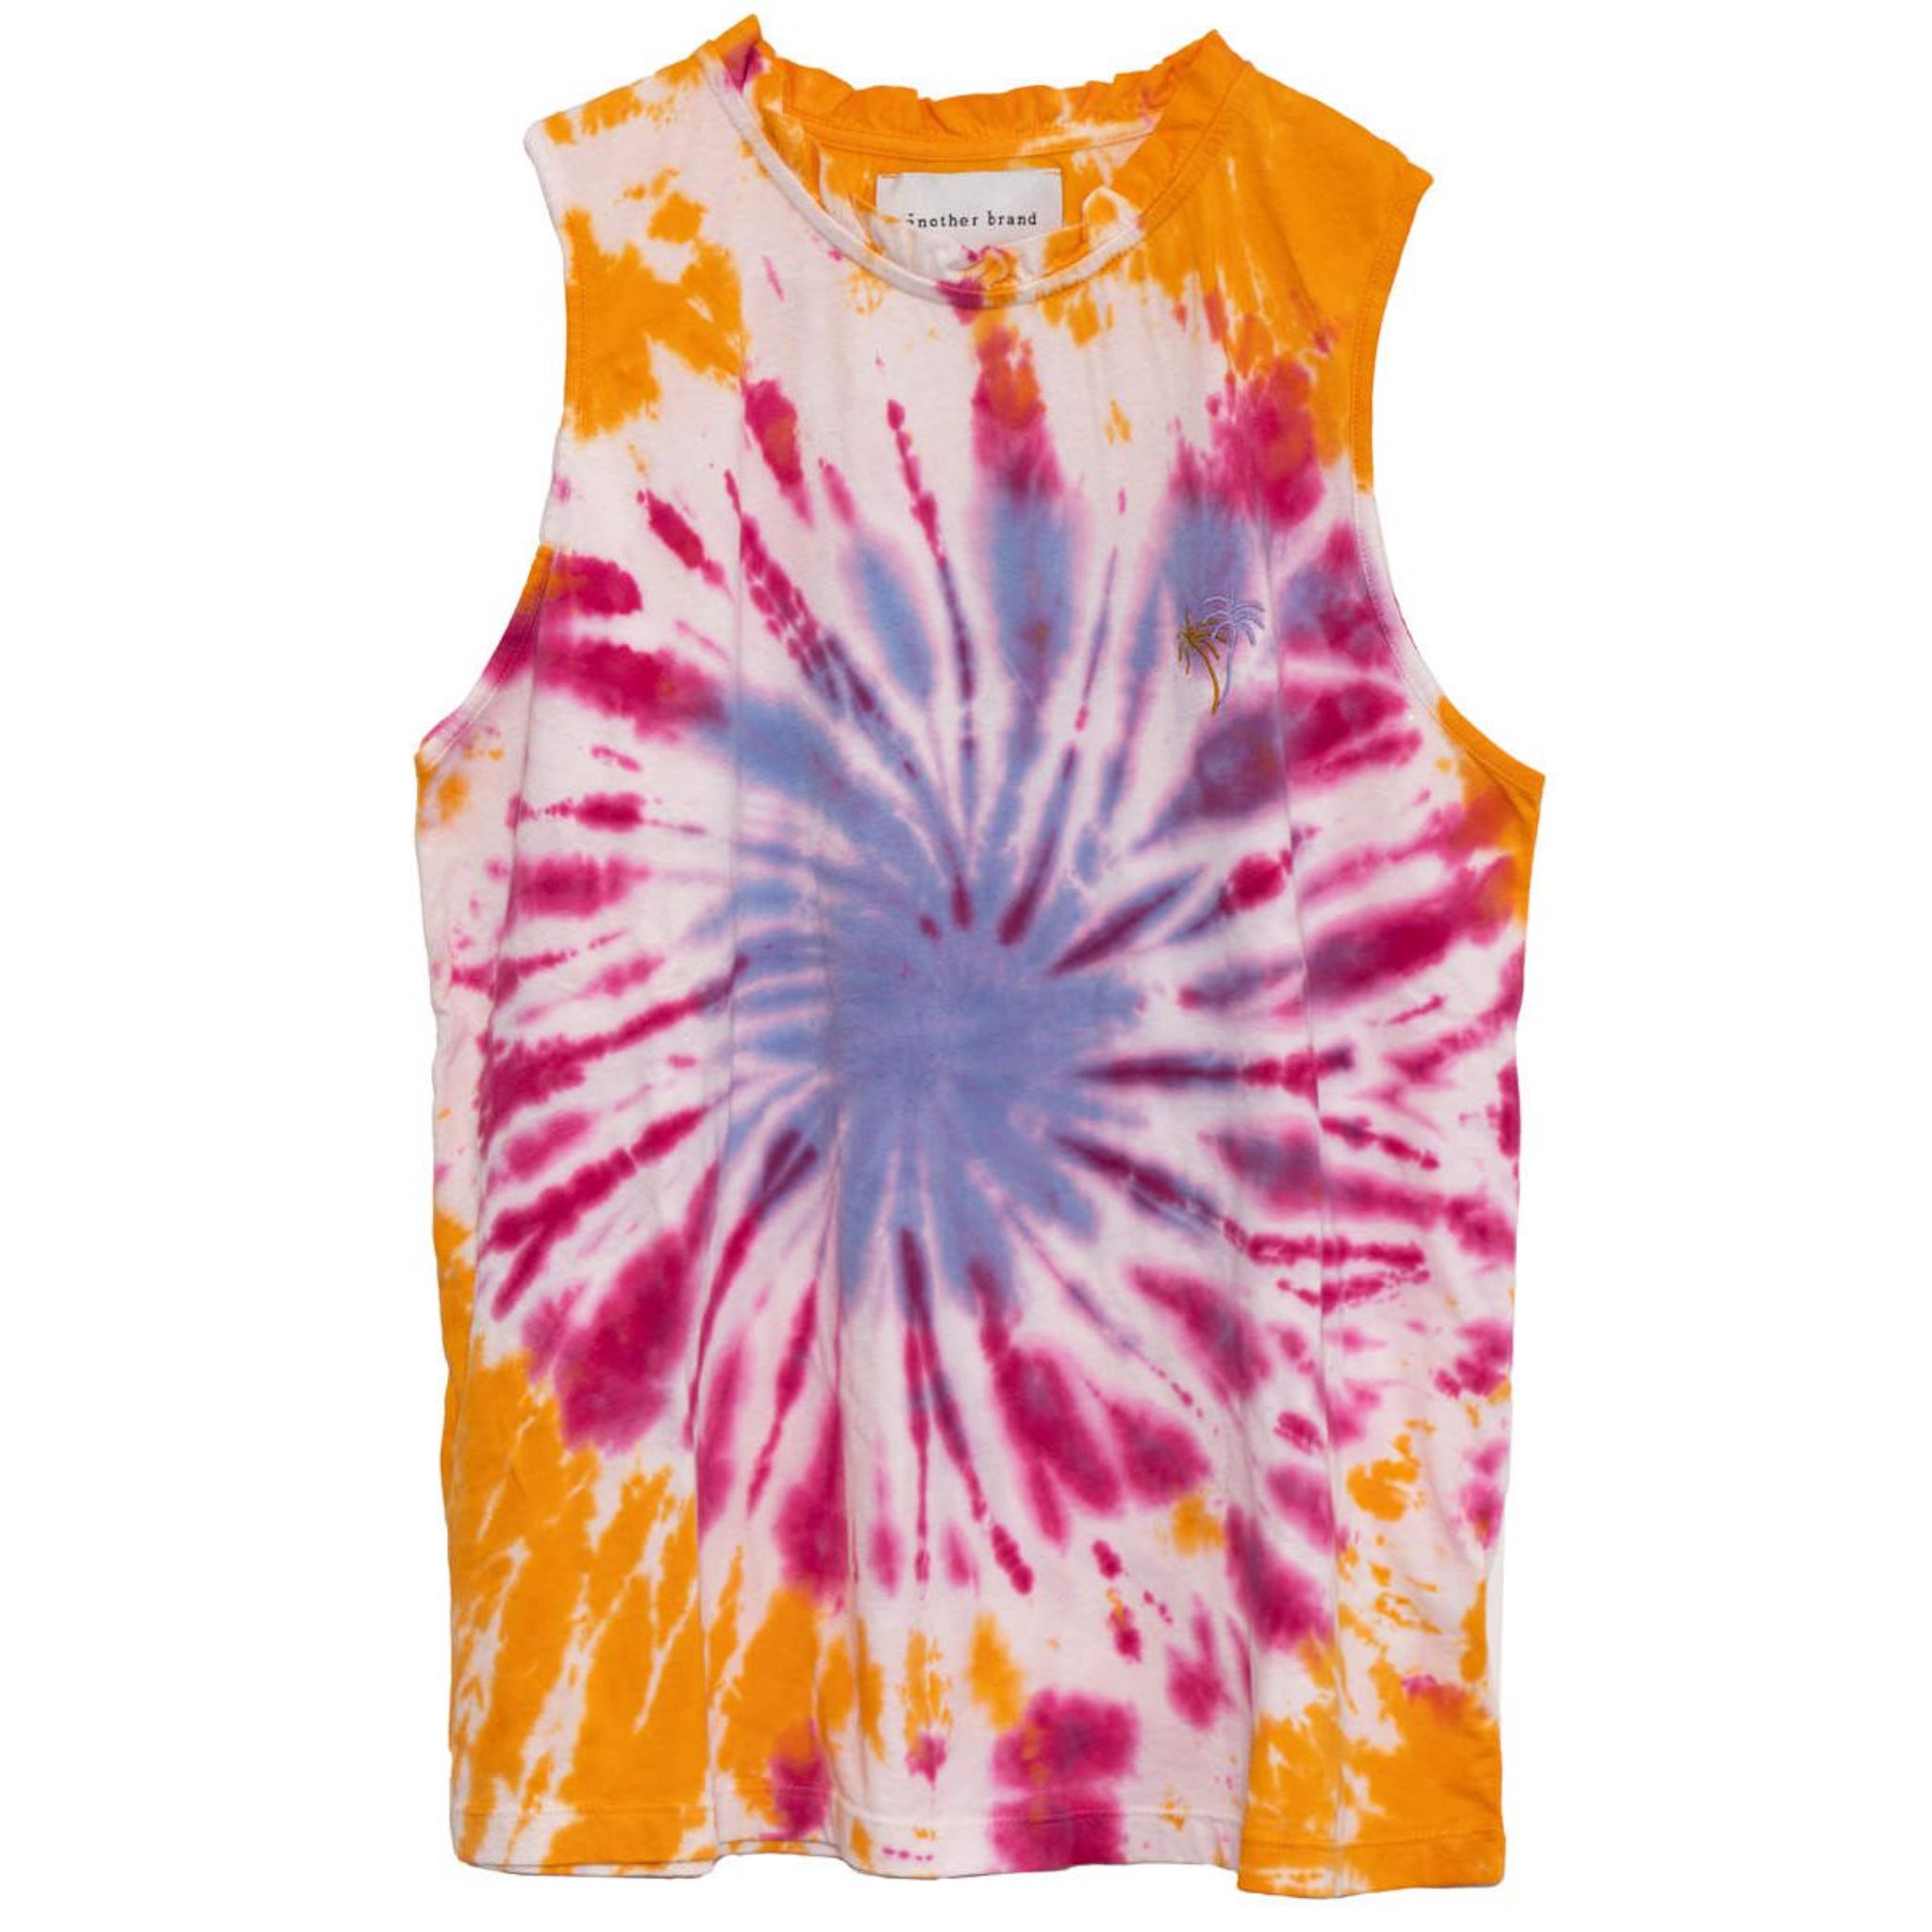 Another Brand Top "Tie Dye"